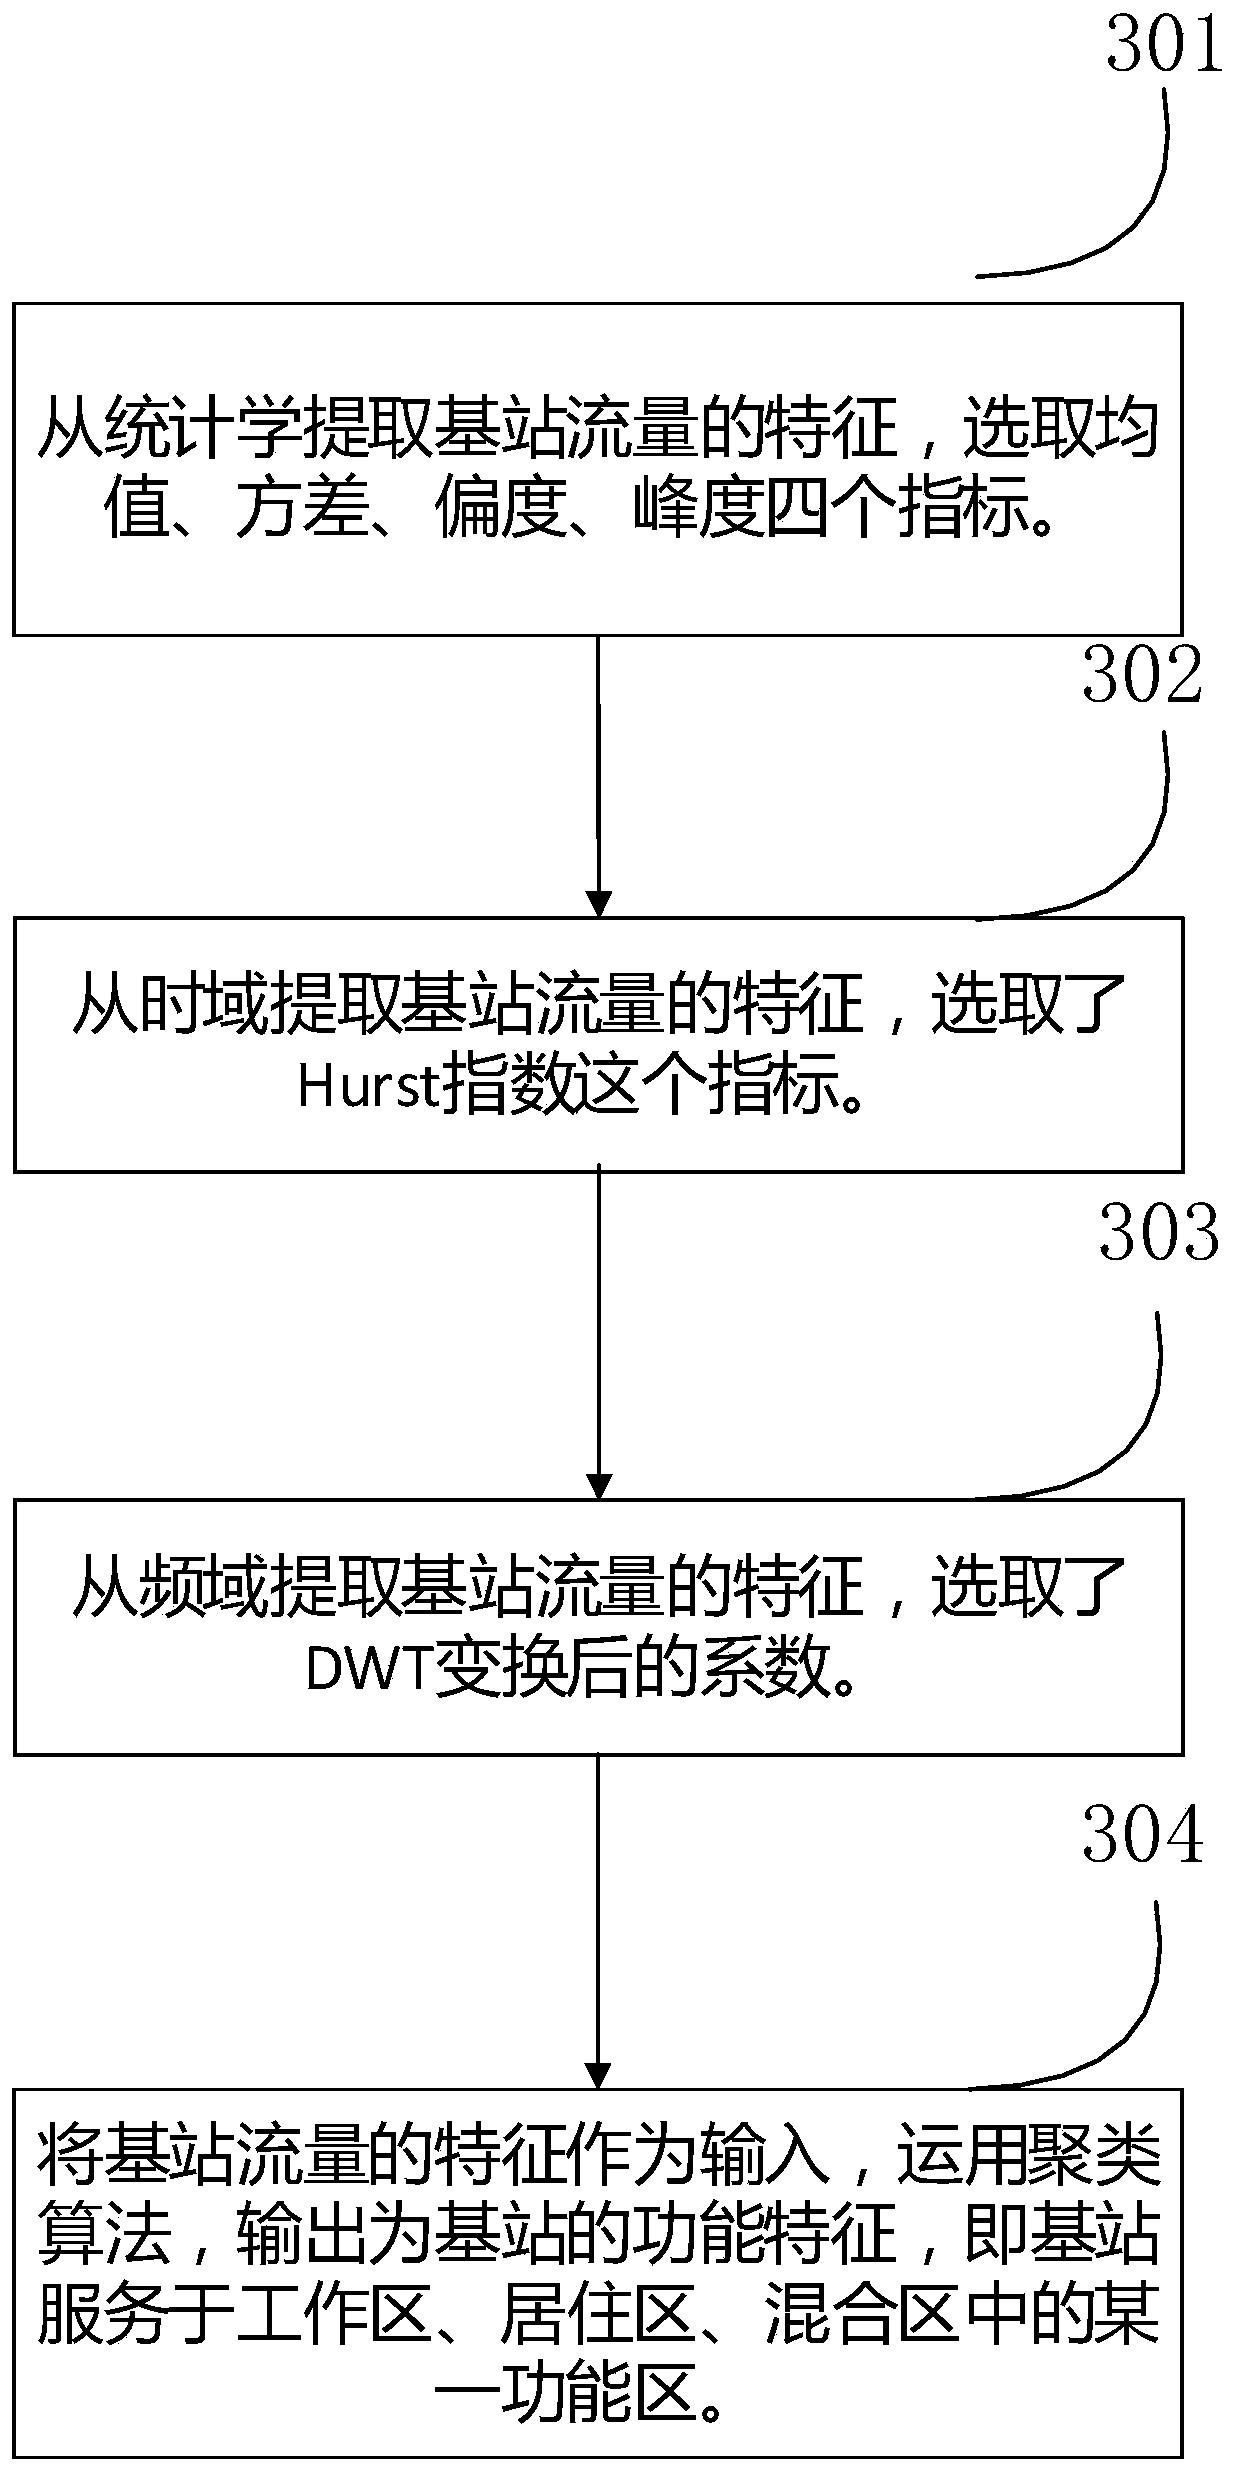 Method and device for evaluating contact demand compactness among functional areas of city